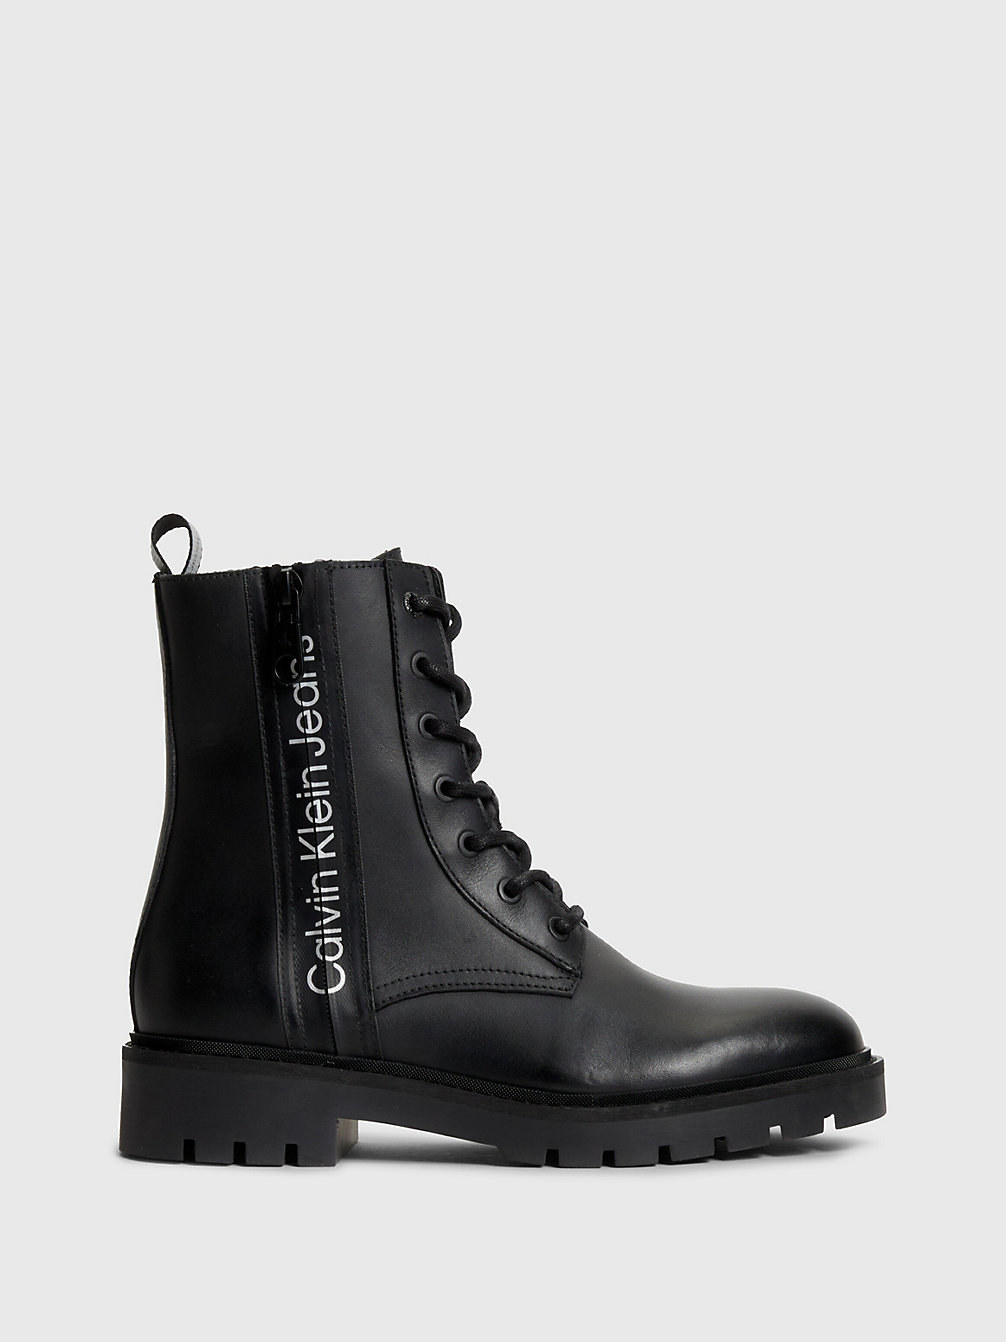 BLACK/REFLECTIVE SILVER Leather Boots undefined women Calvin Klein